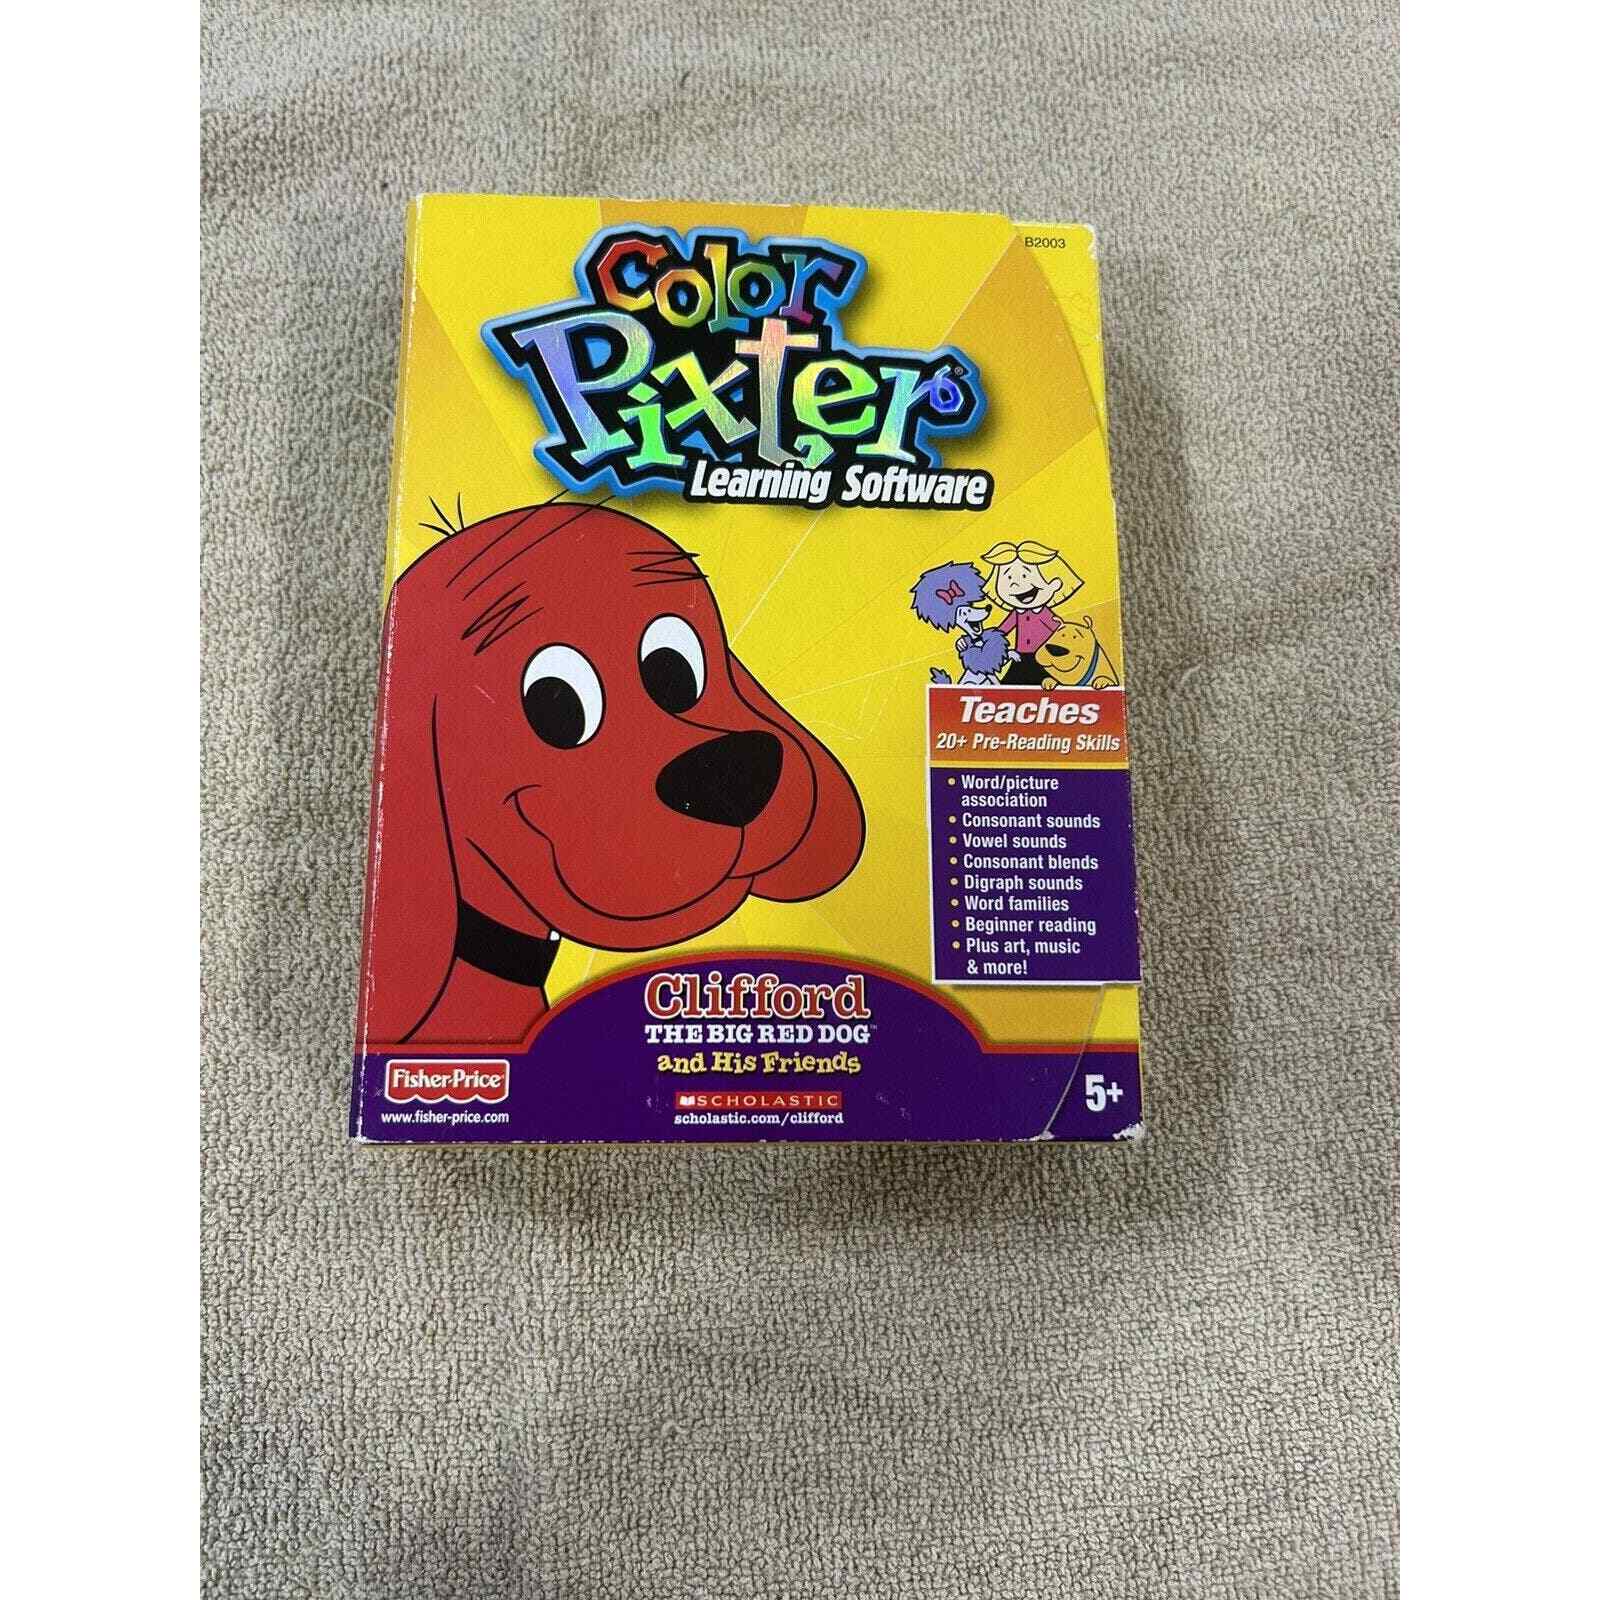 color pixter learning software clifford the big red dog and his friends Used